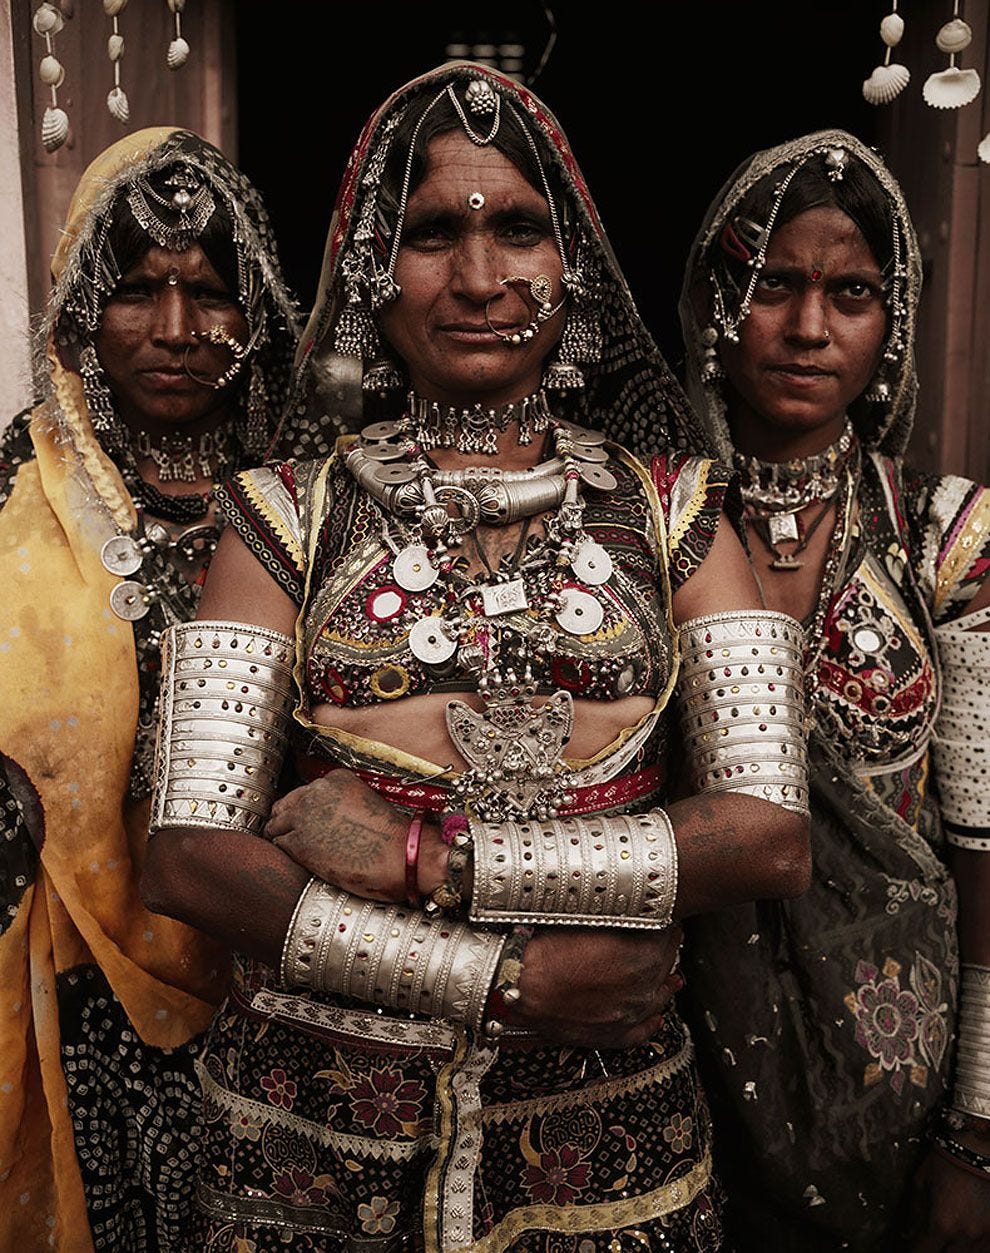 Everything There Is To Know About India's Indigenous Fashion